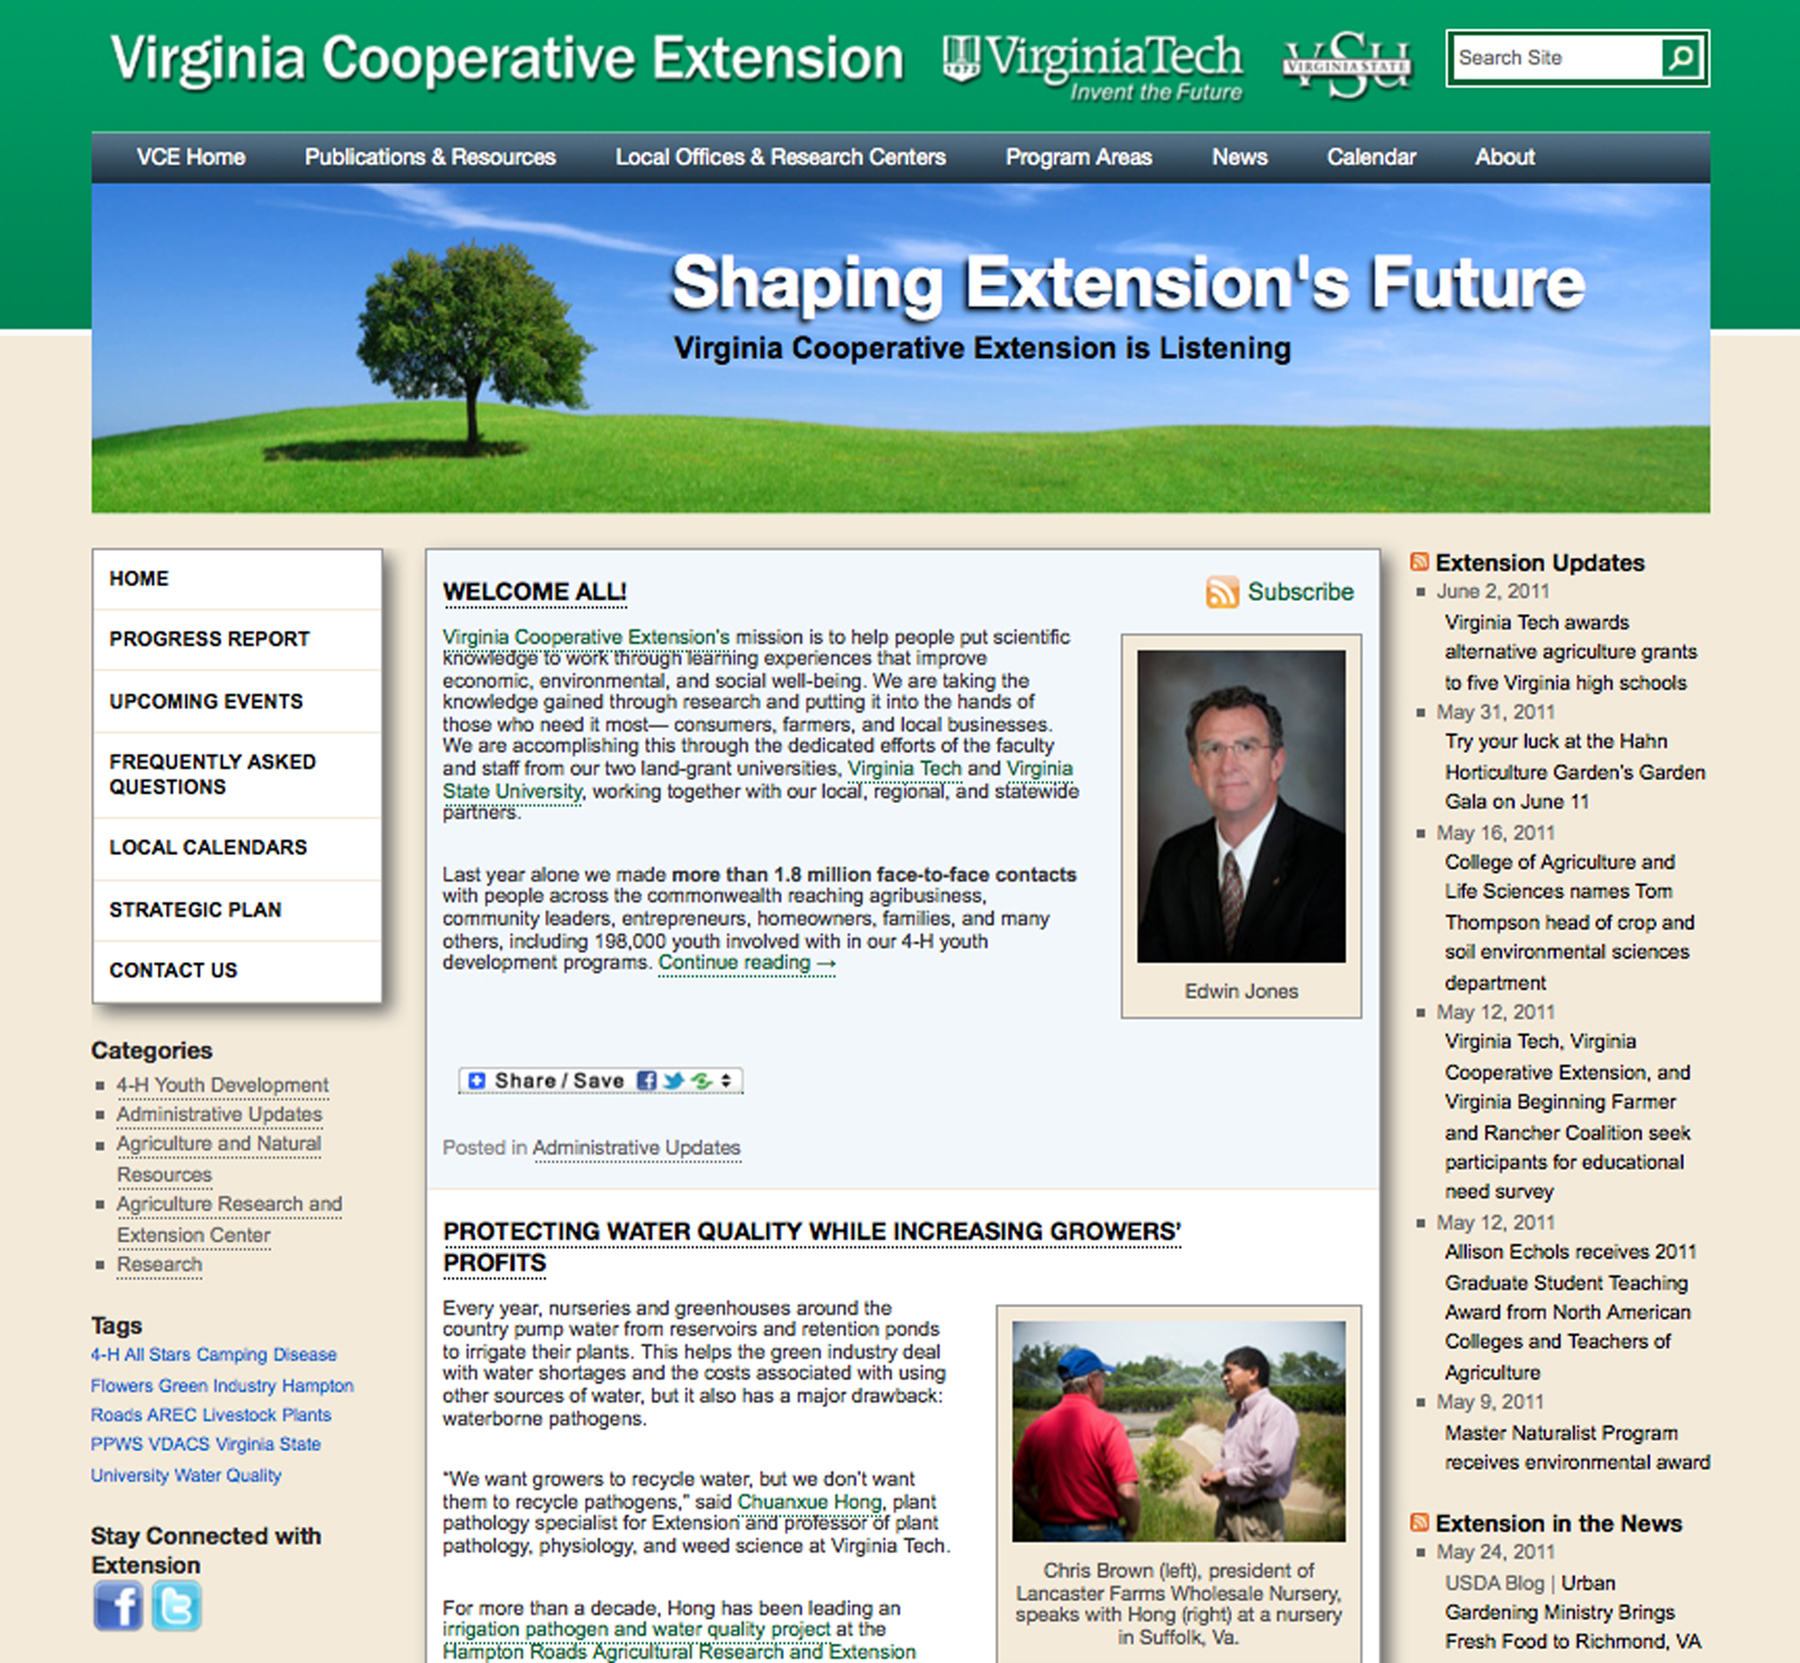 Shaping Extension's Future